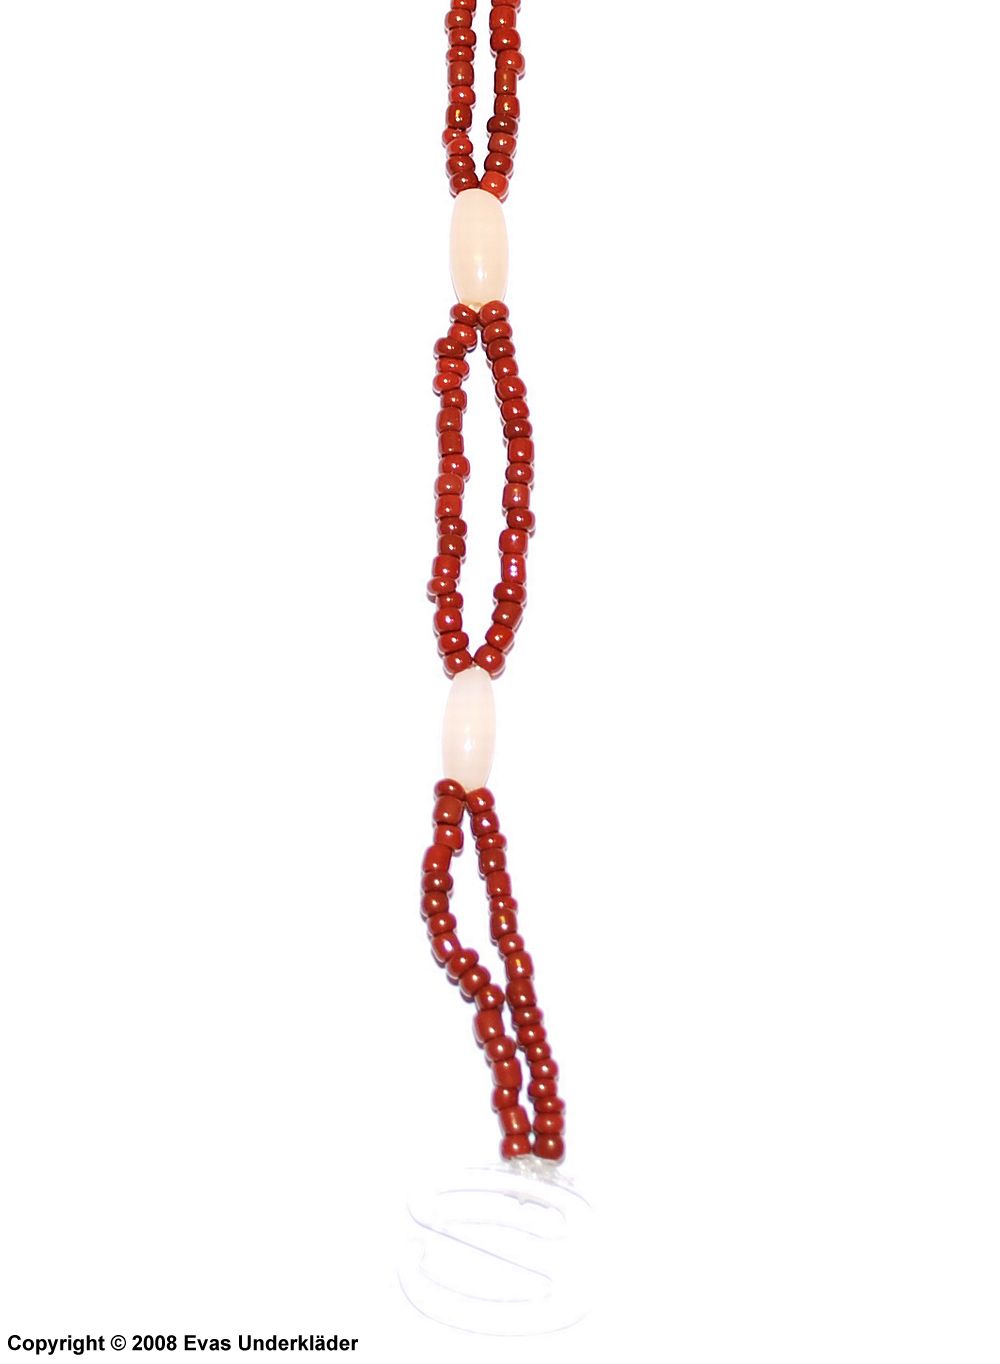 Bra straps in red and cream beads